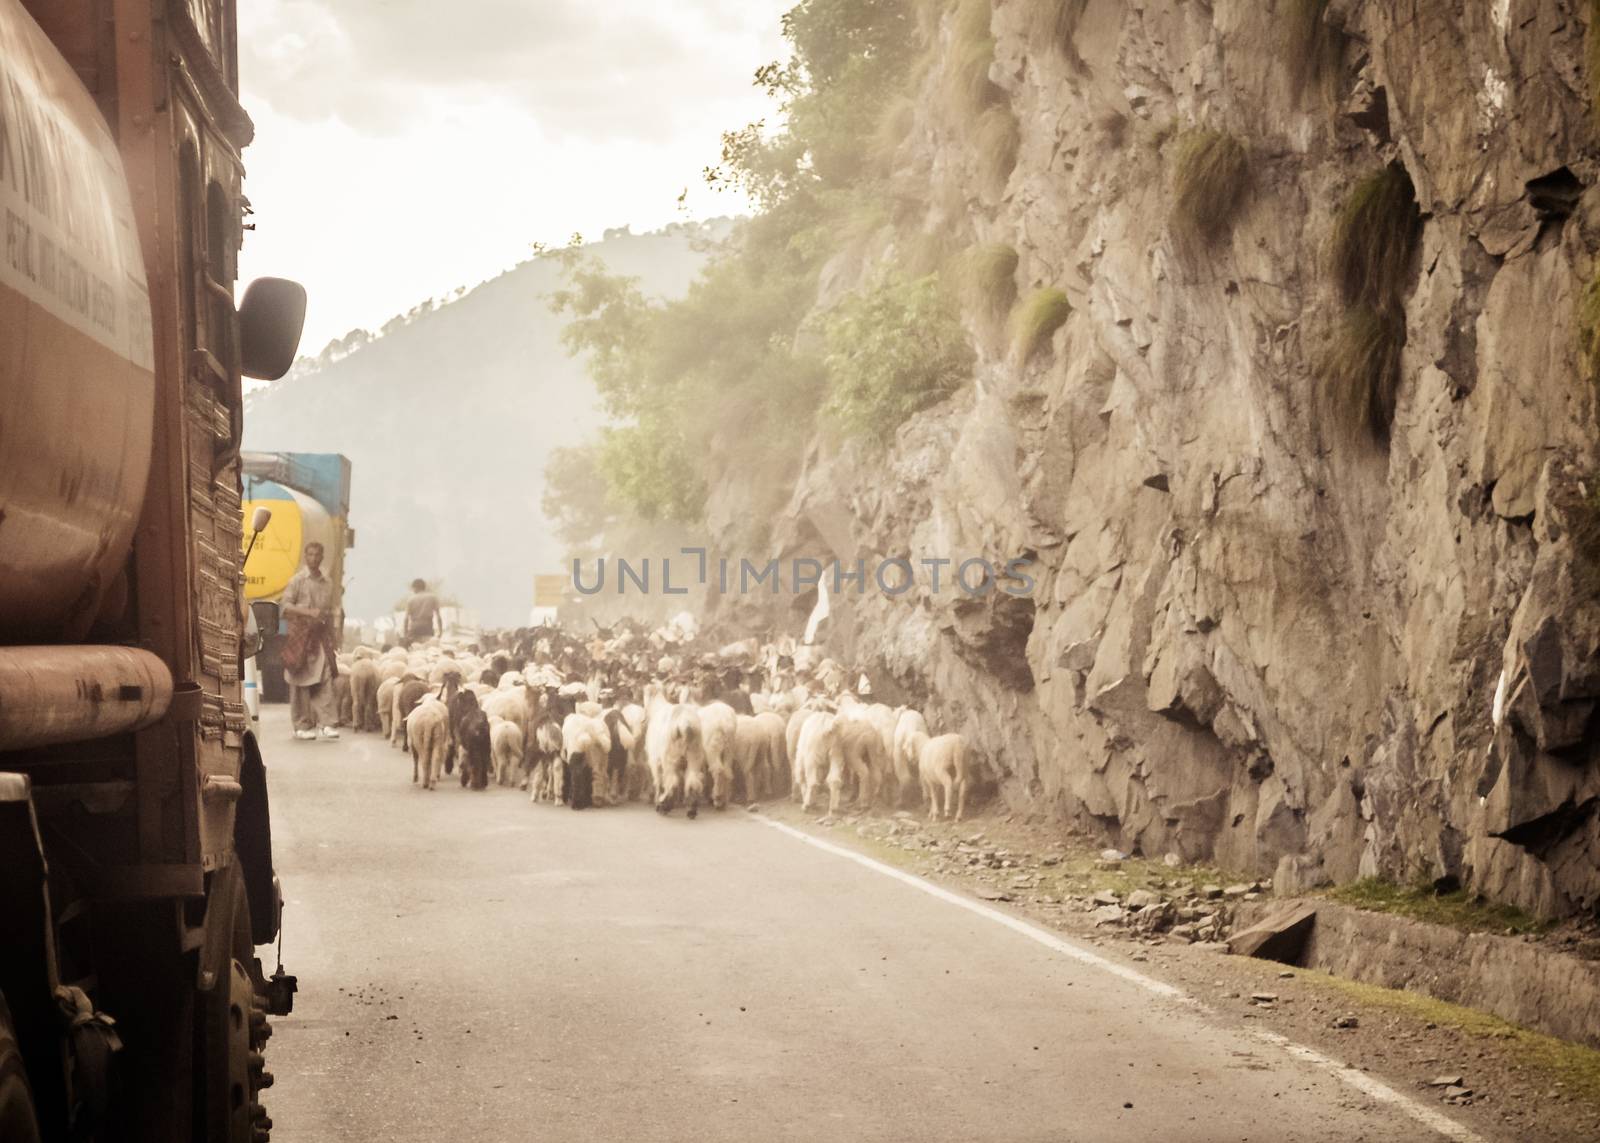 Car Point of view image. A flock of Sheep walking along a country highway in himalayan mountain pass in Leh Ladakh Manali Road of Kashmir India by sudiptabhowmick